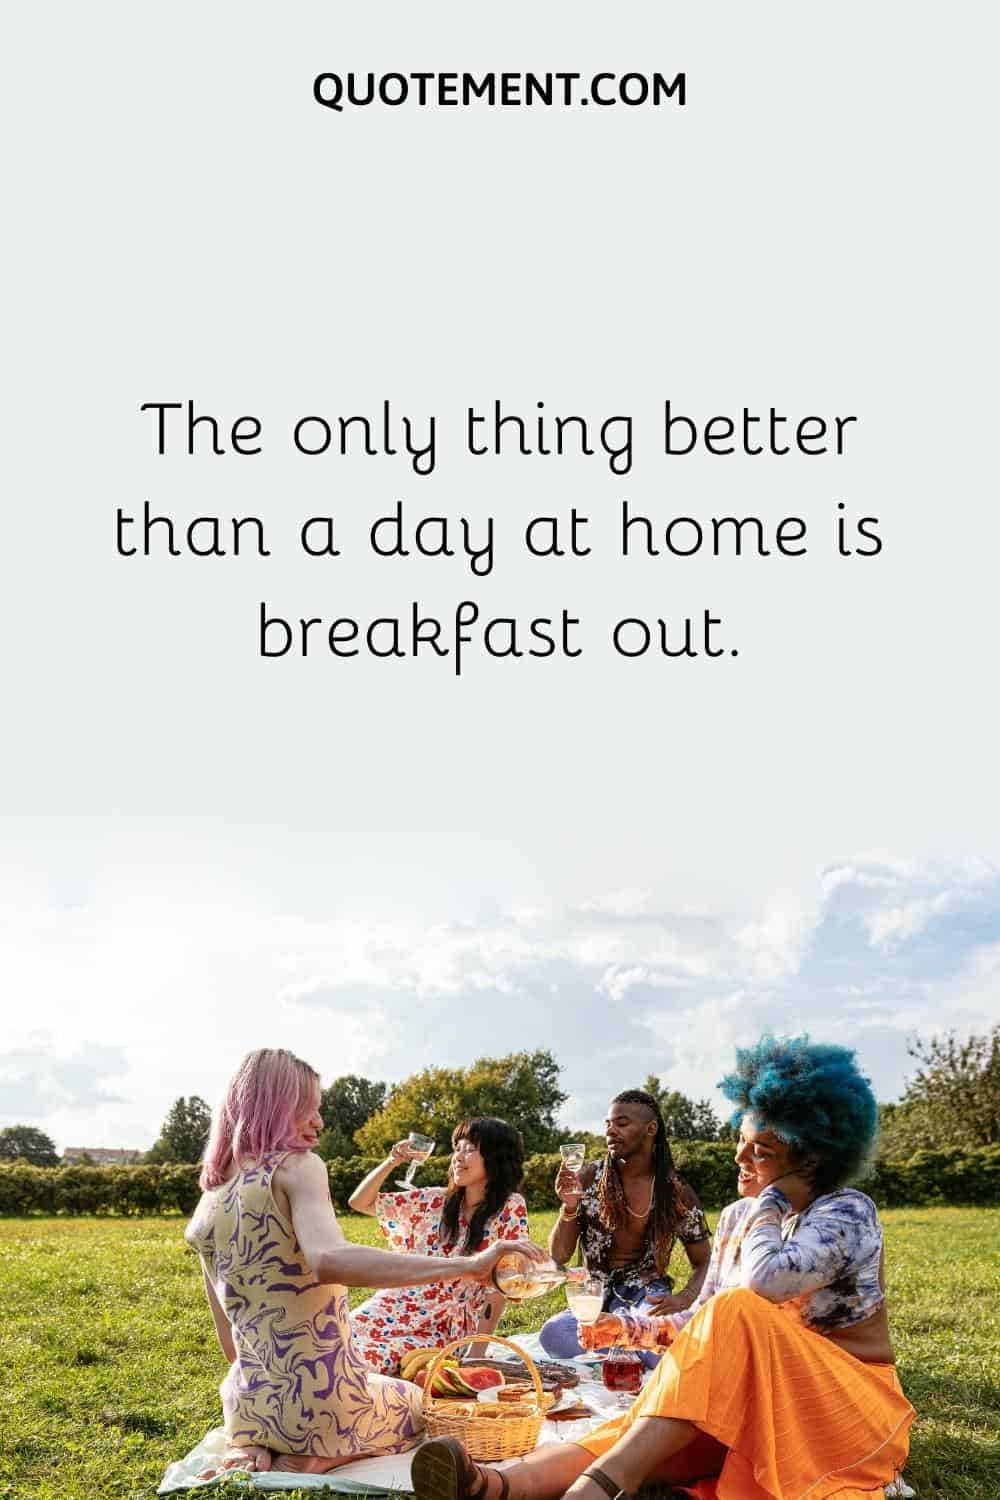 The only thing better than a day at home is breakfast out.